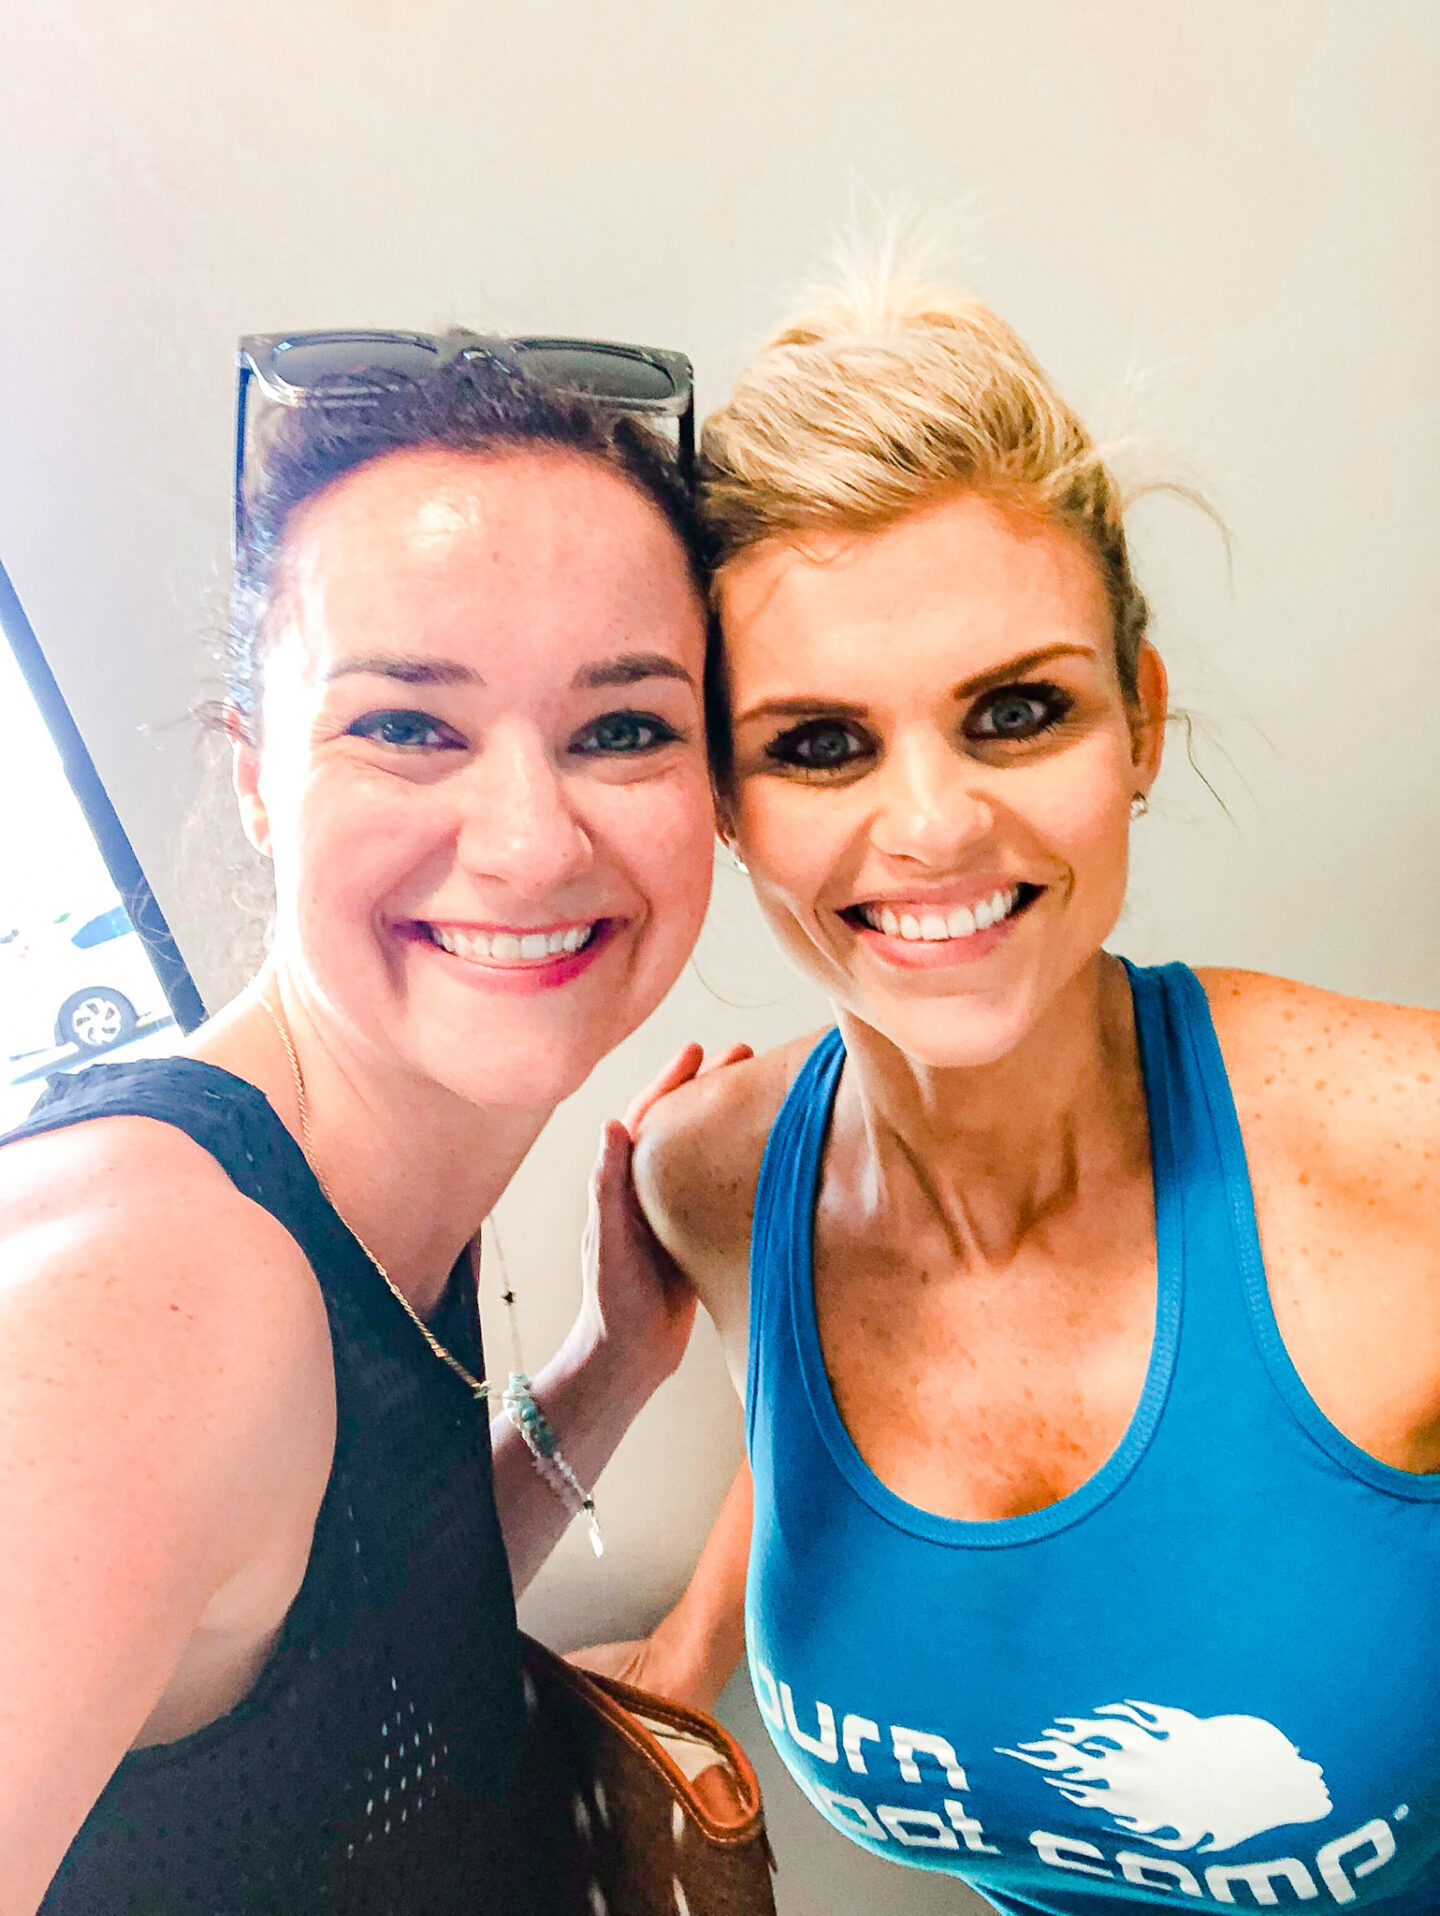 Podcast host + fitness blogger, My Life Well Loved, shares about friends and fitness with her trainer. Click NOW to read + listen!